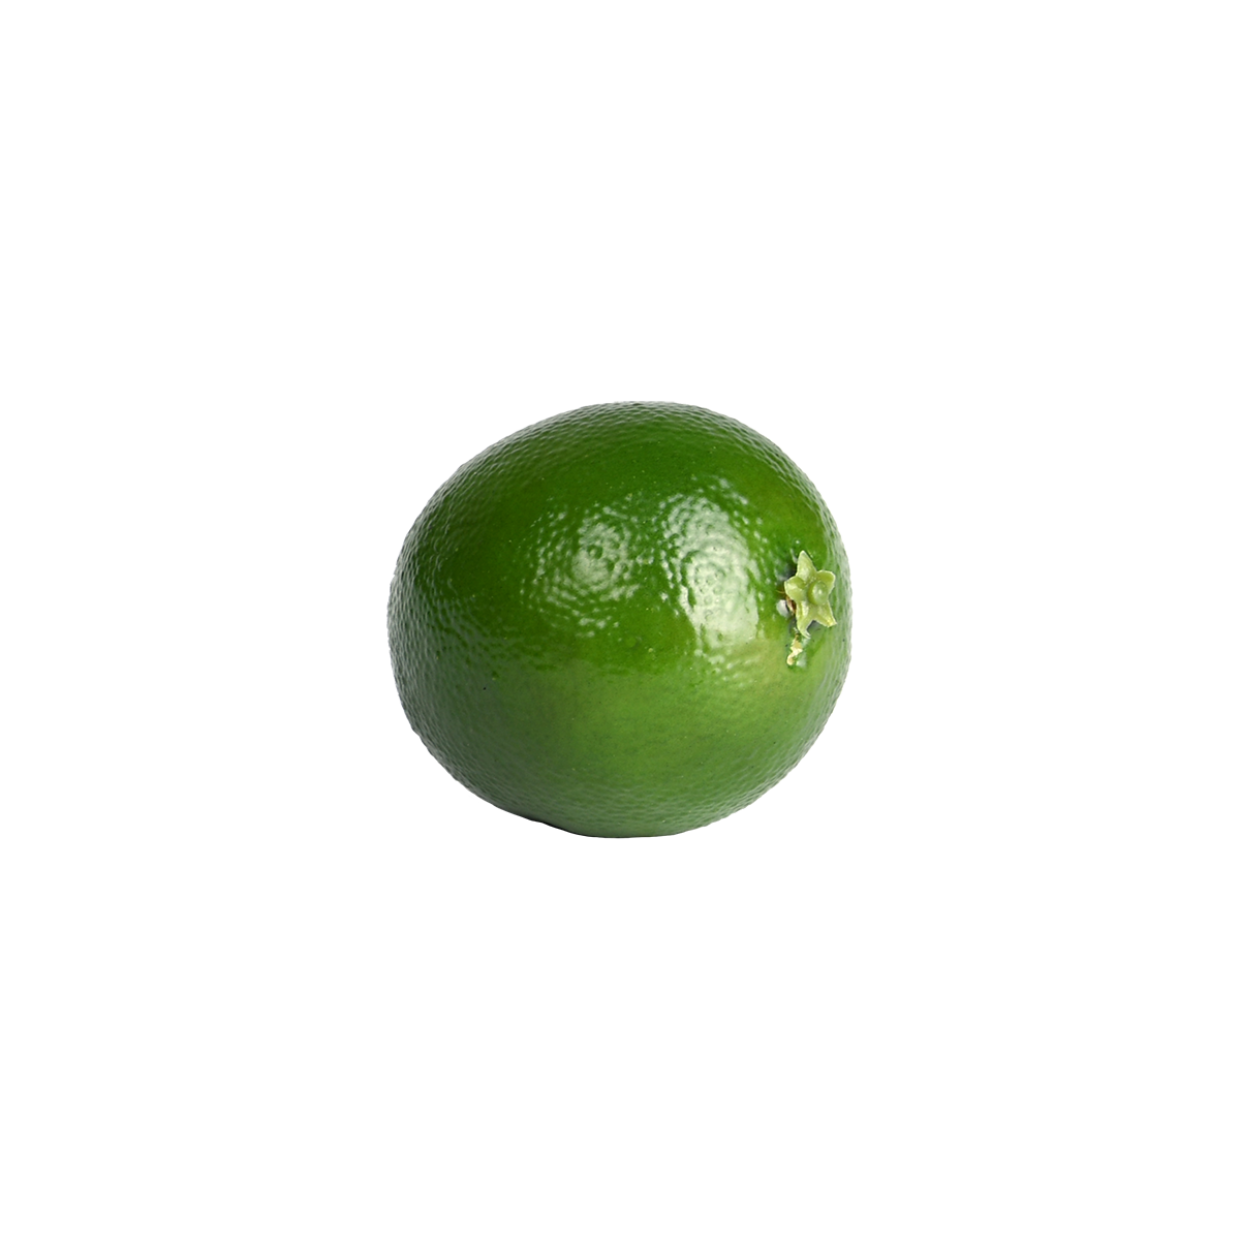 Artificial Lime